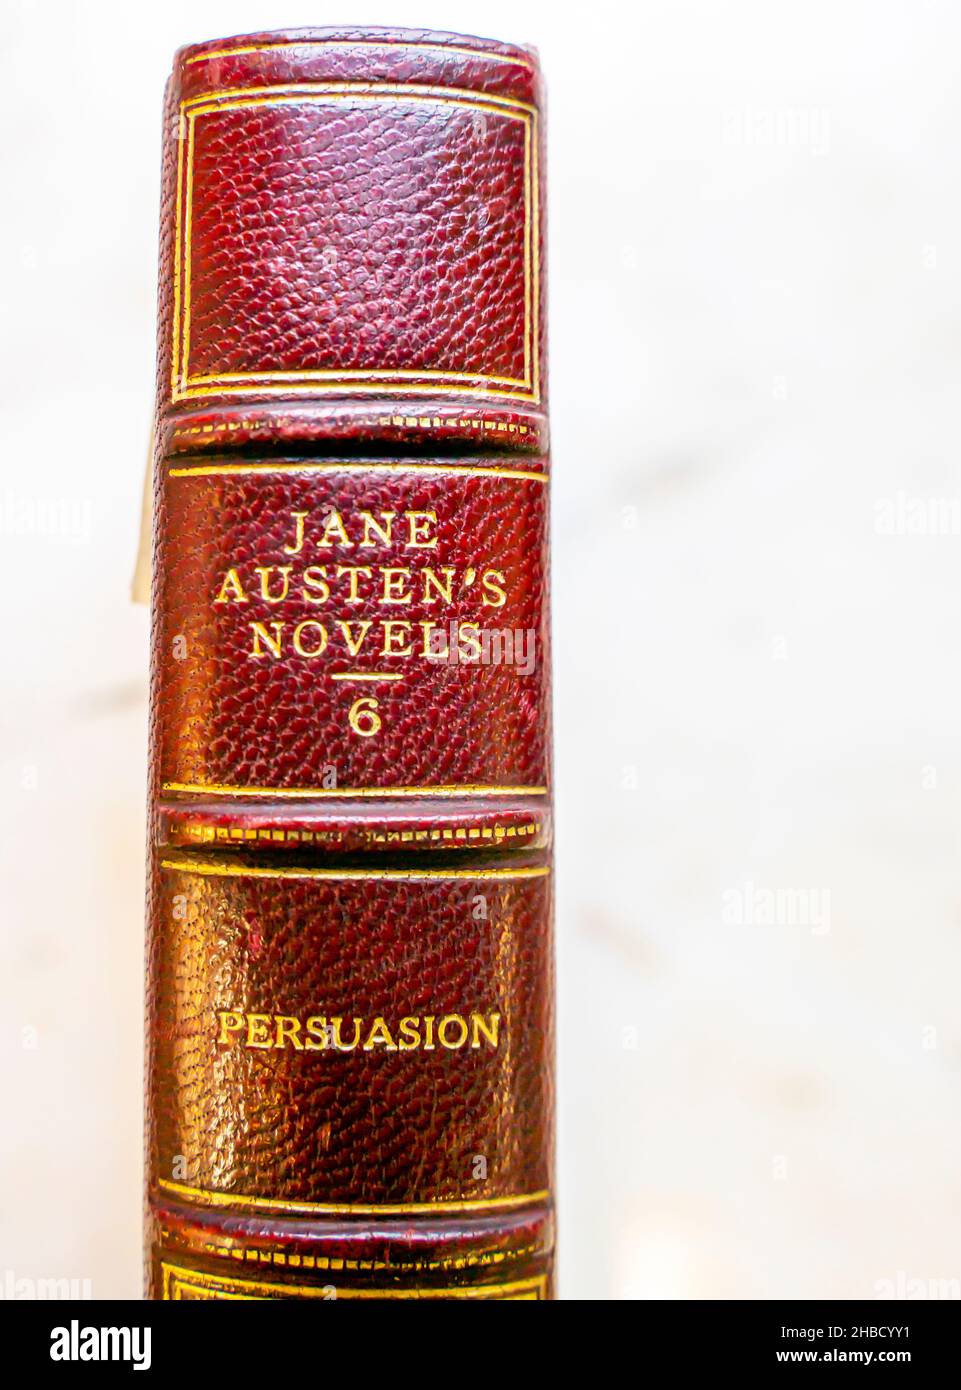 Red leathered book spine of Jane Austen's Persuasion . The novel persuasion is to be adapted into motion picture in 2022. Stock Photo